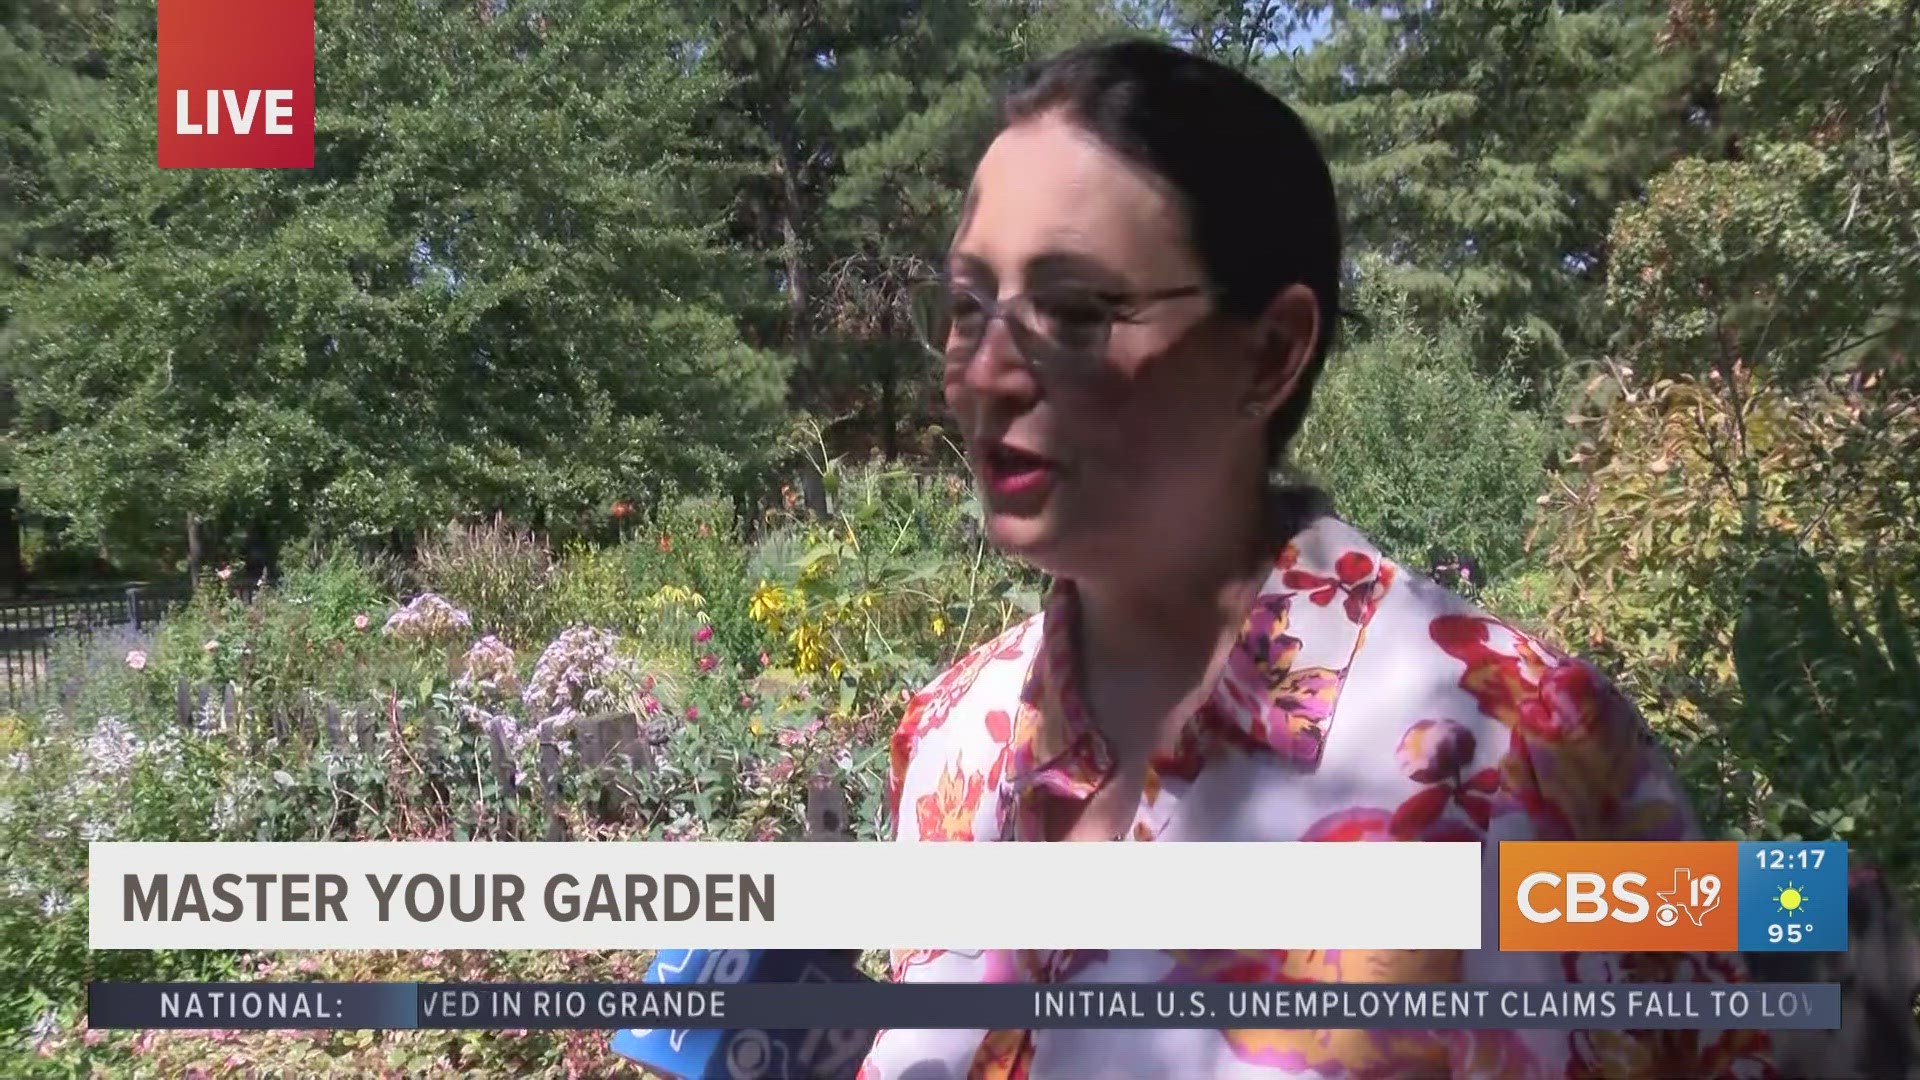 The Smith County Master Gardeners tell us how to encourage pollinators in your garden during the autumn months.